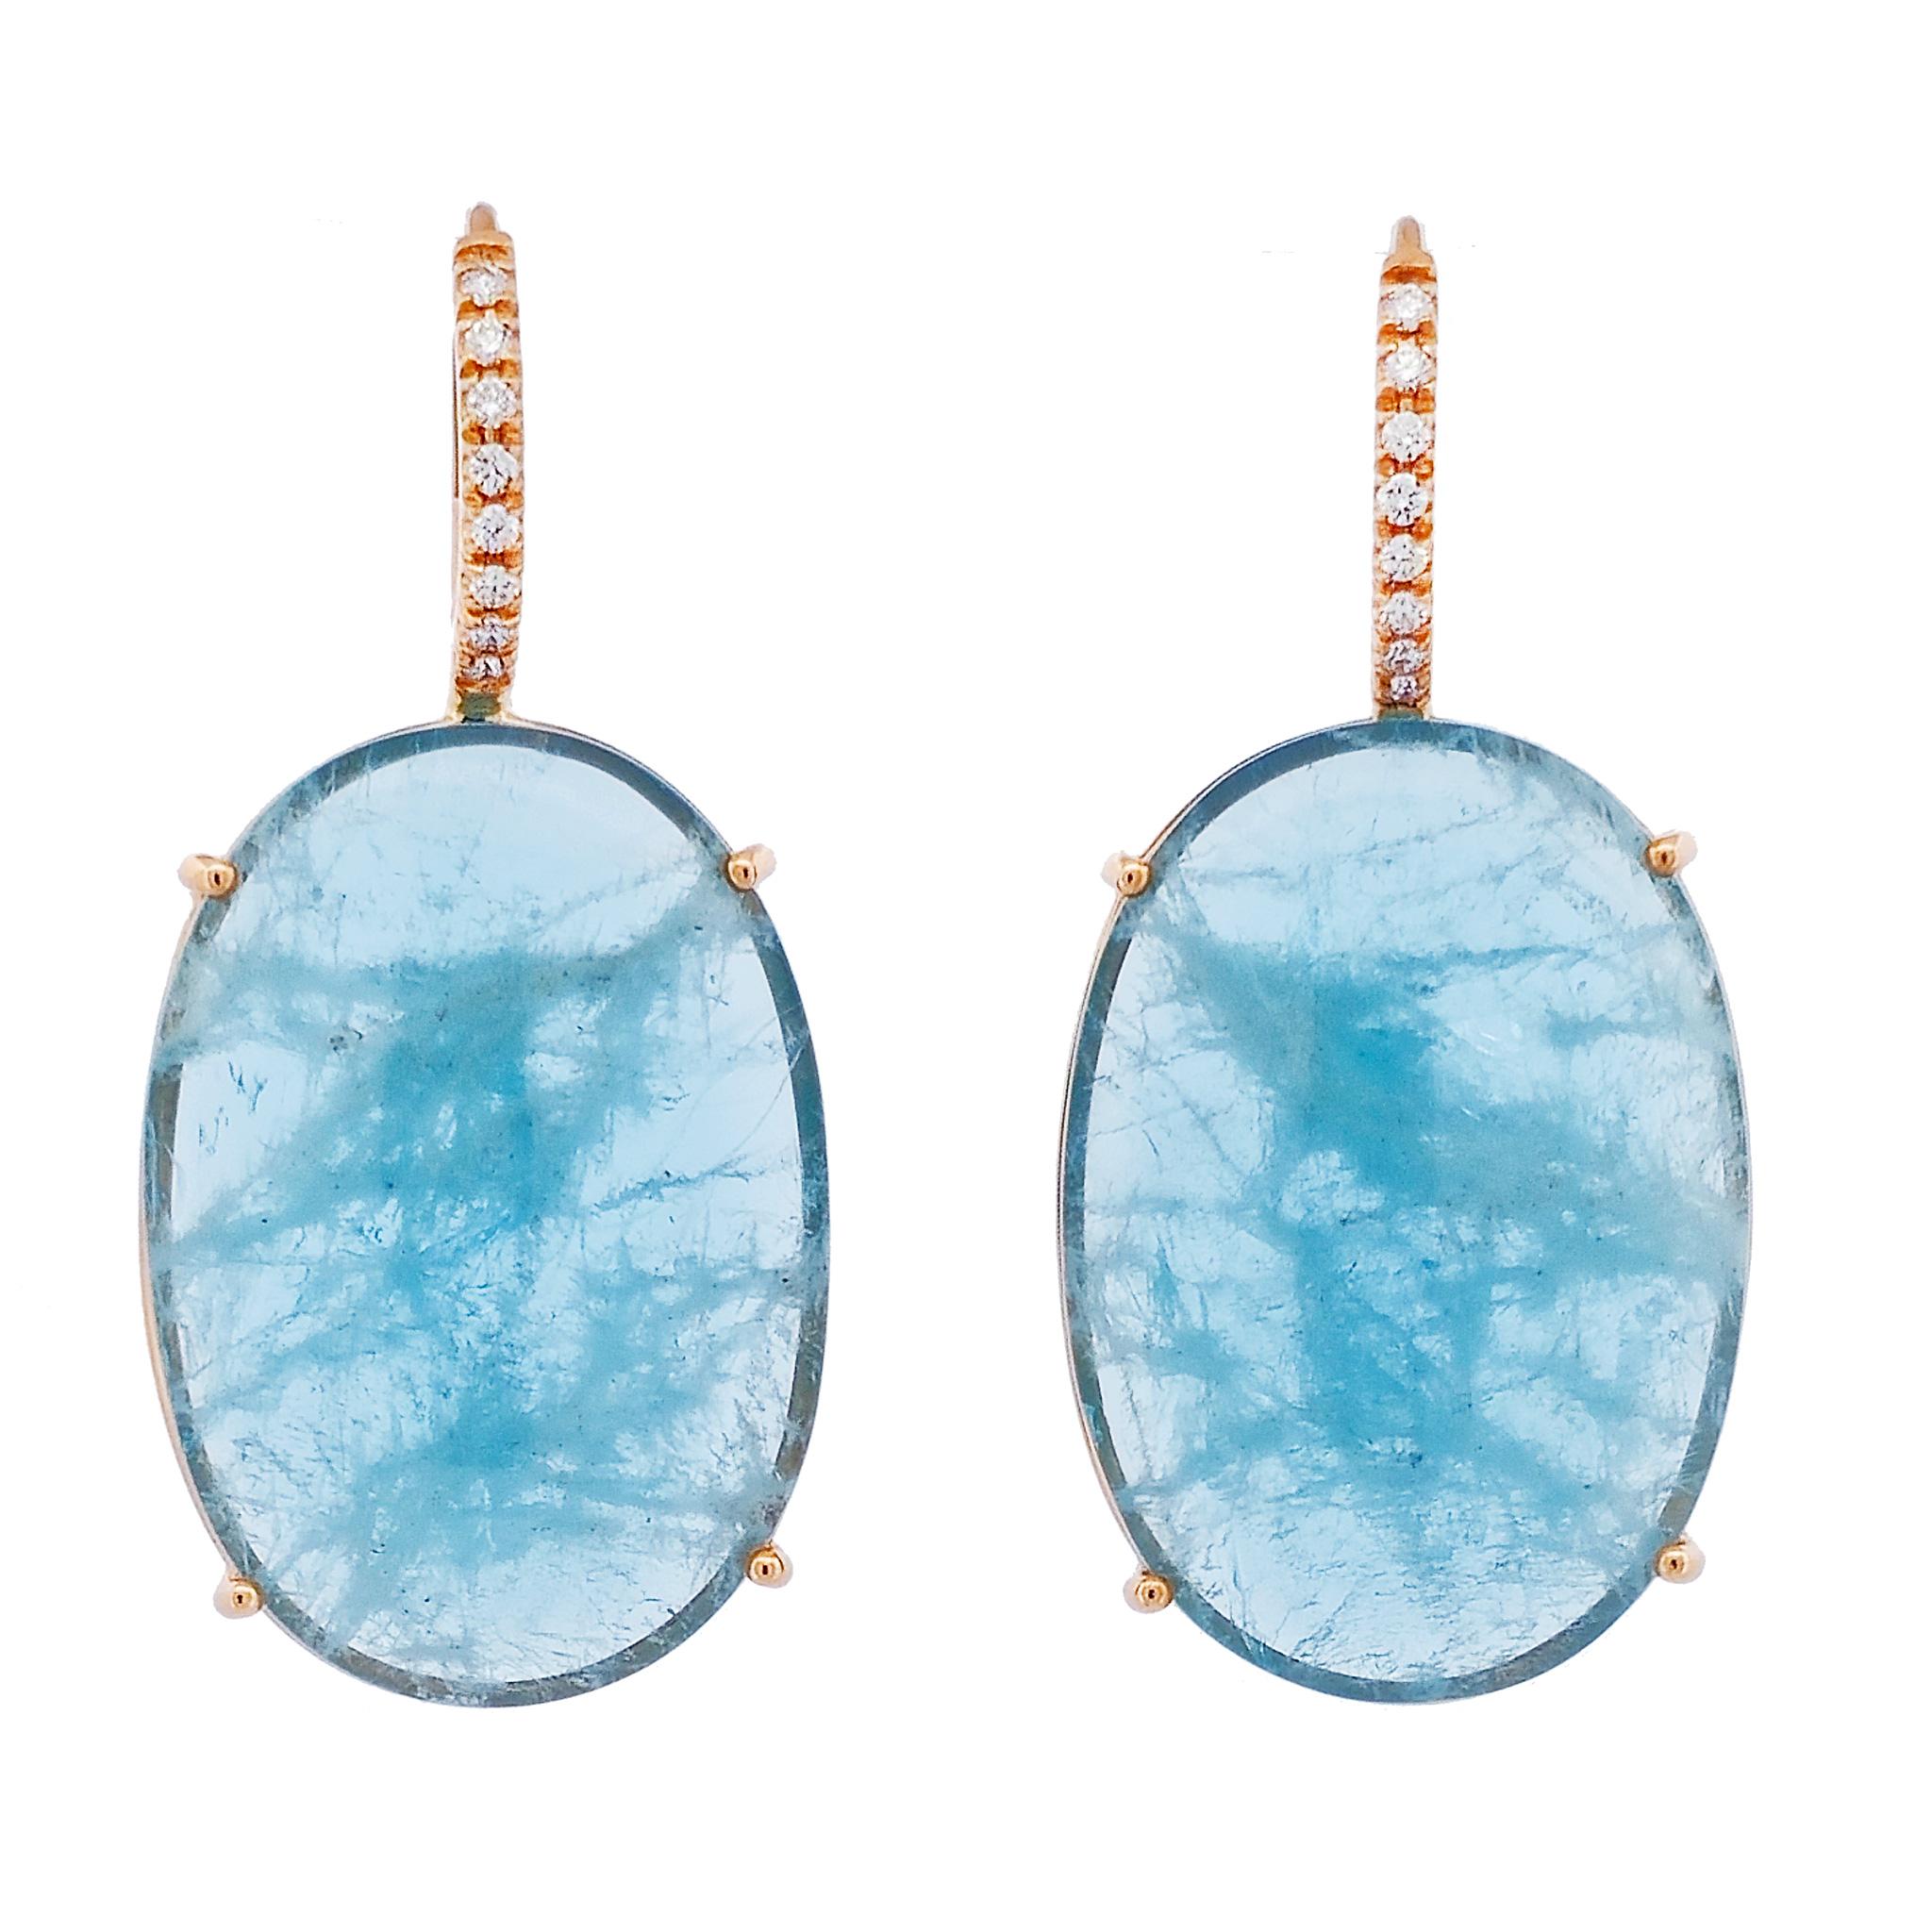 This stunning pair of aquamarine drop earrings are handcrafted with a total of 30.42 carats of cabochon cut aquamarines. There are 16 diamonds totaling 0.15 carats that are F/G in color and VS in clarity. 

These are crafted in 18 karat rose